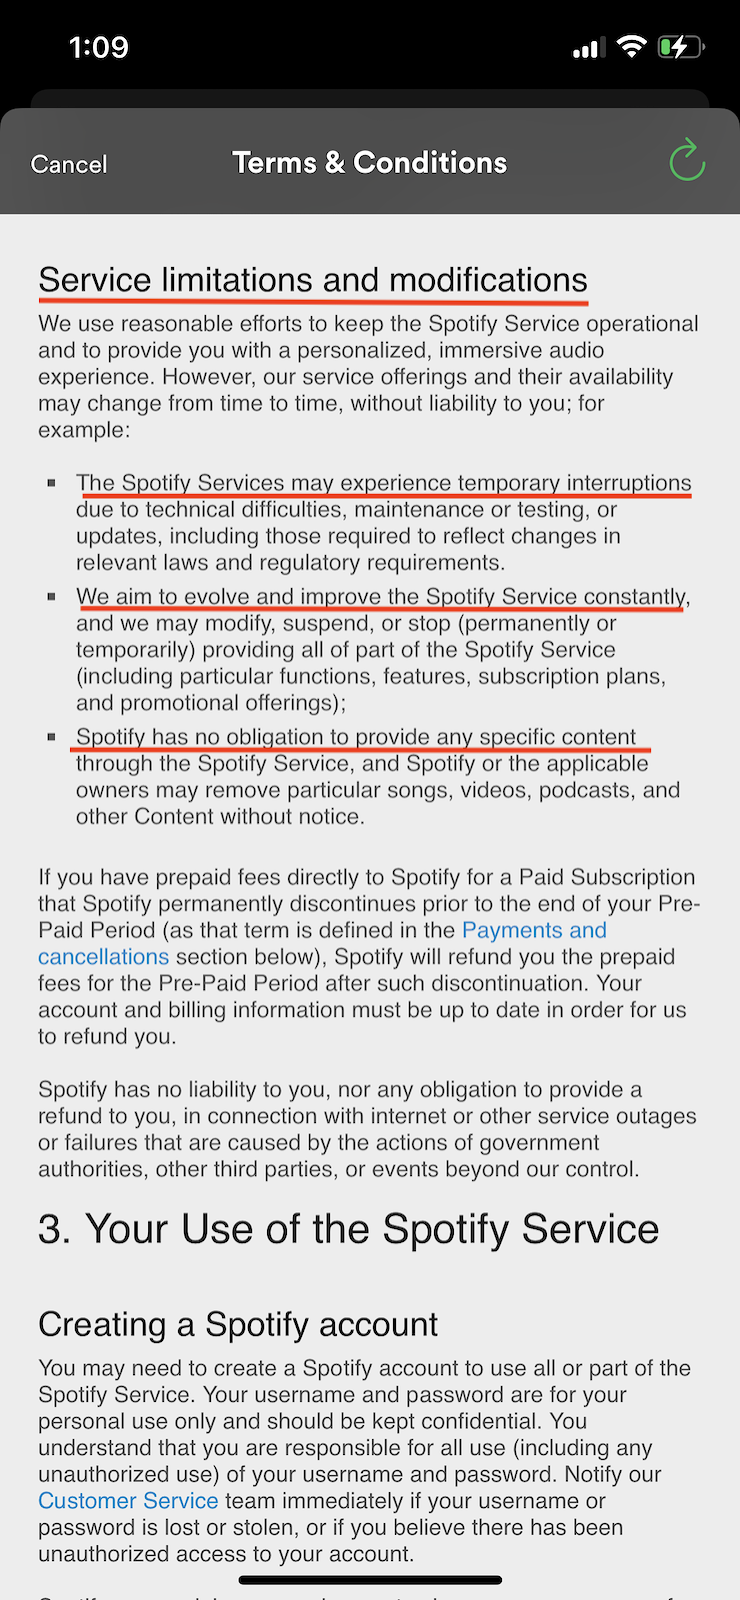 Spoify-mobile-app-terms-and-conditions-changes-to-your-app-or-terms